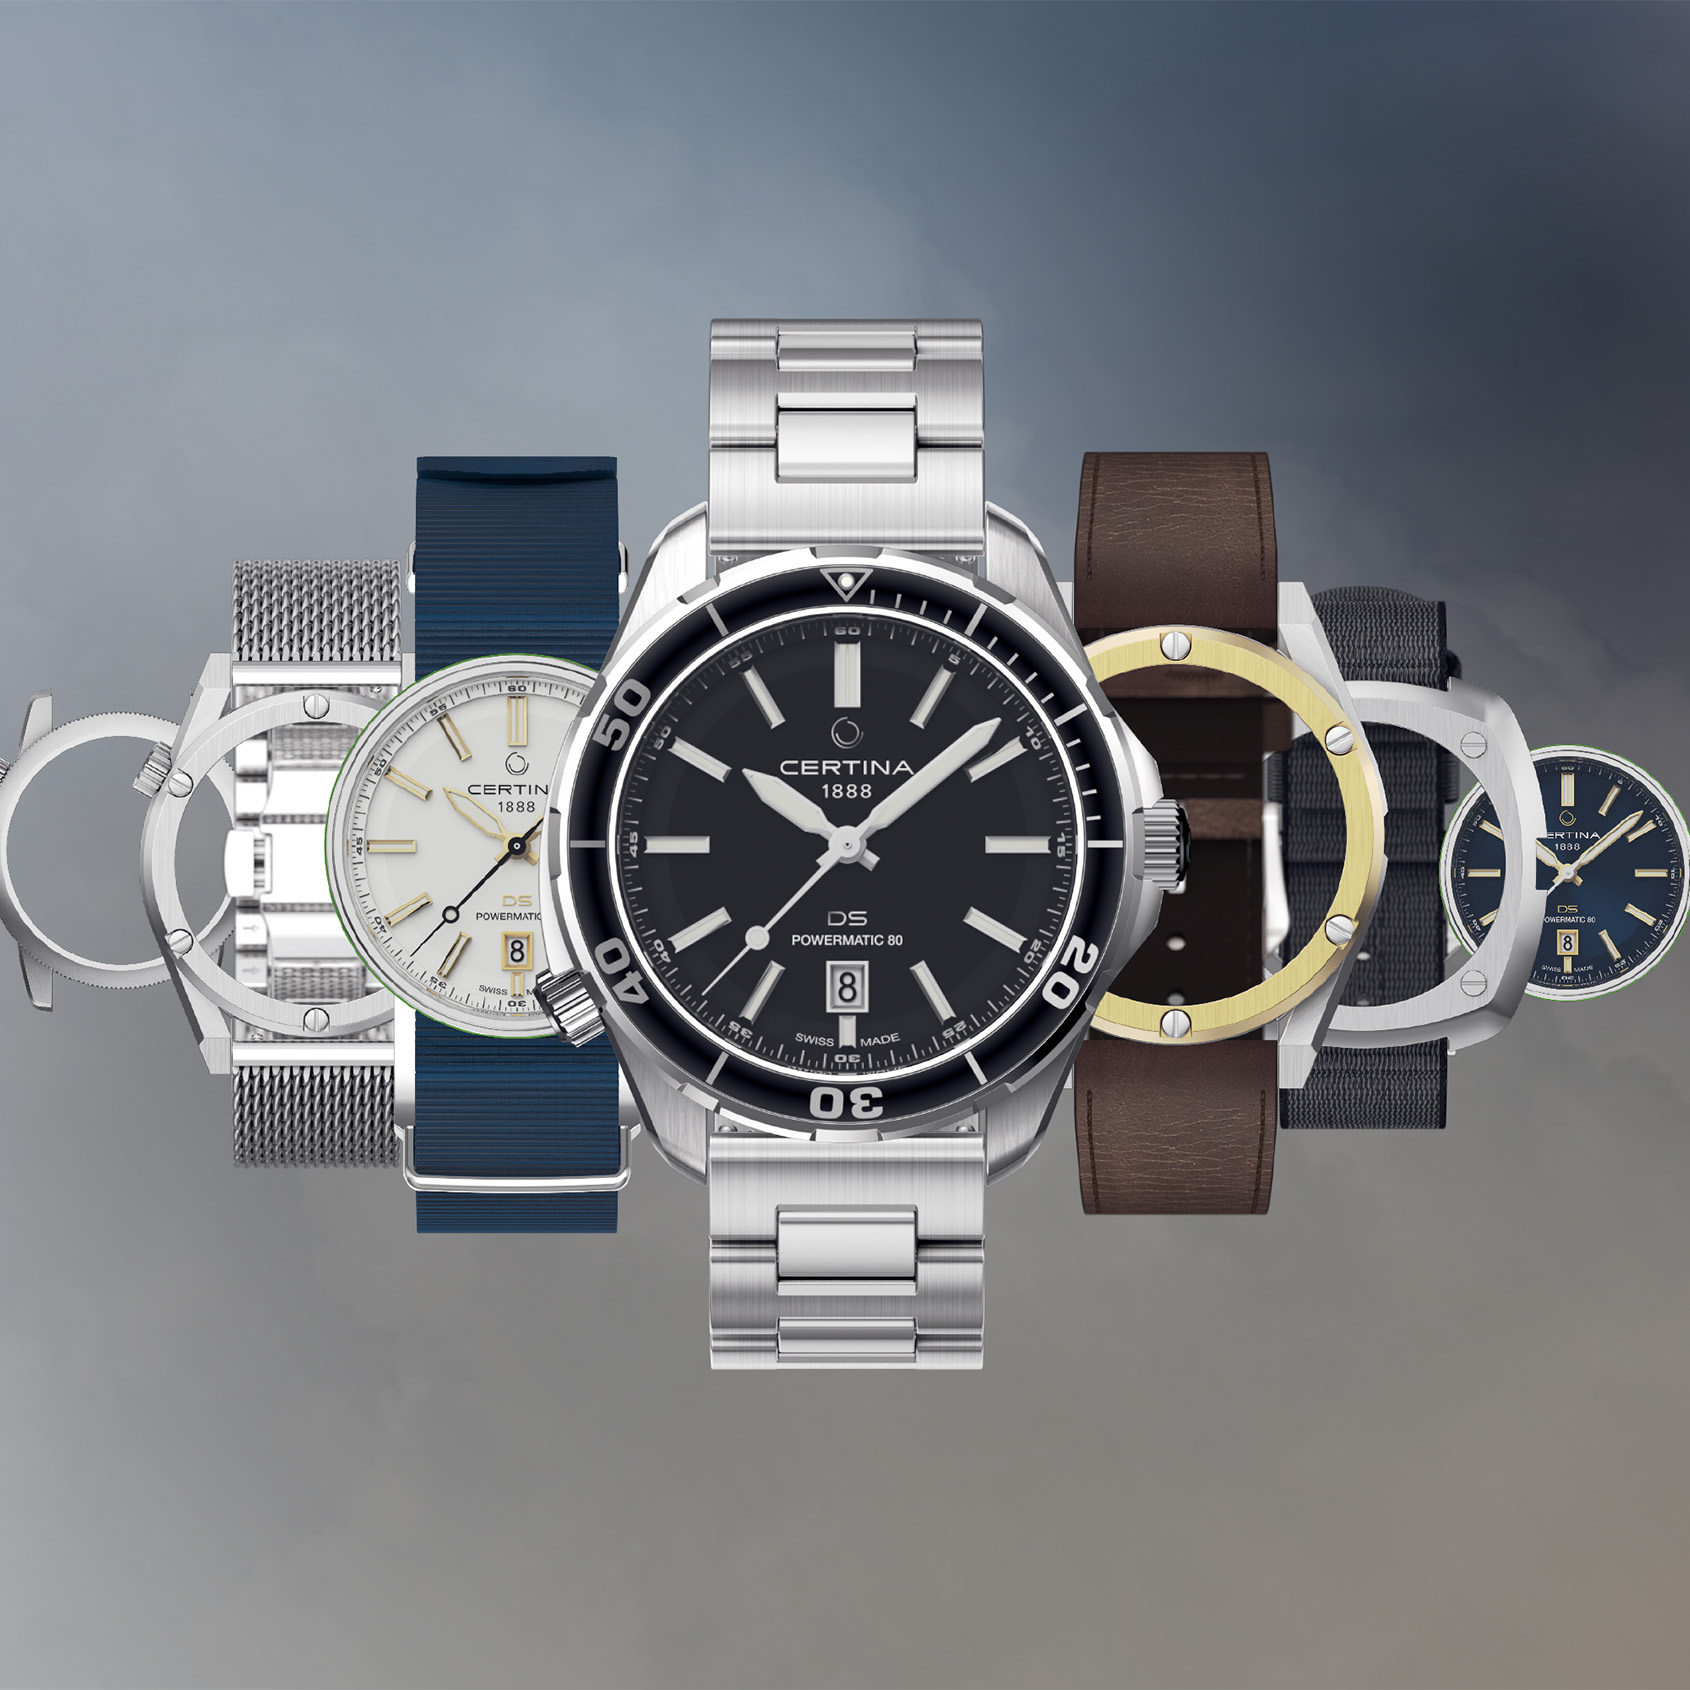 The Certina DS+ is a shapeshifting innovation that lets you switch watch cases with zero fuss